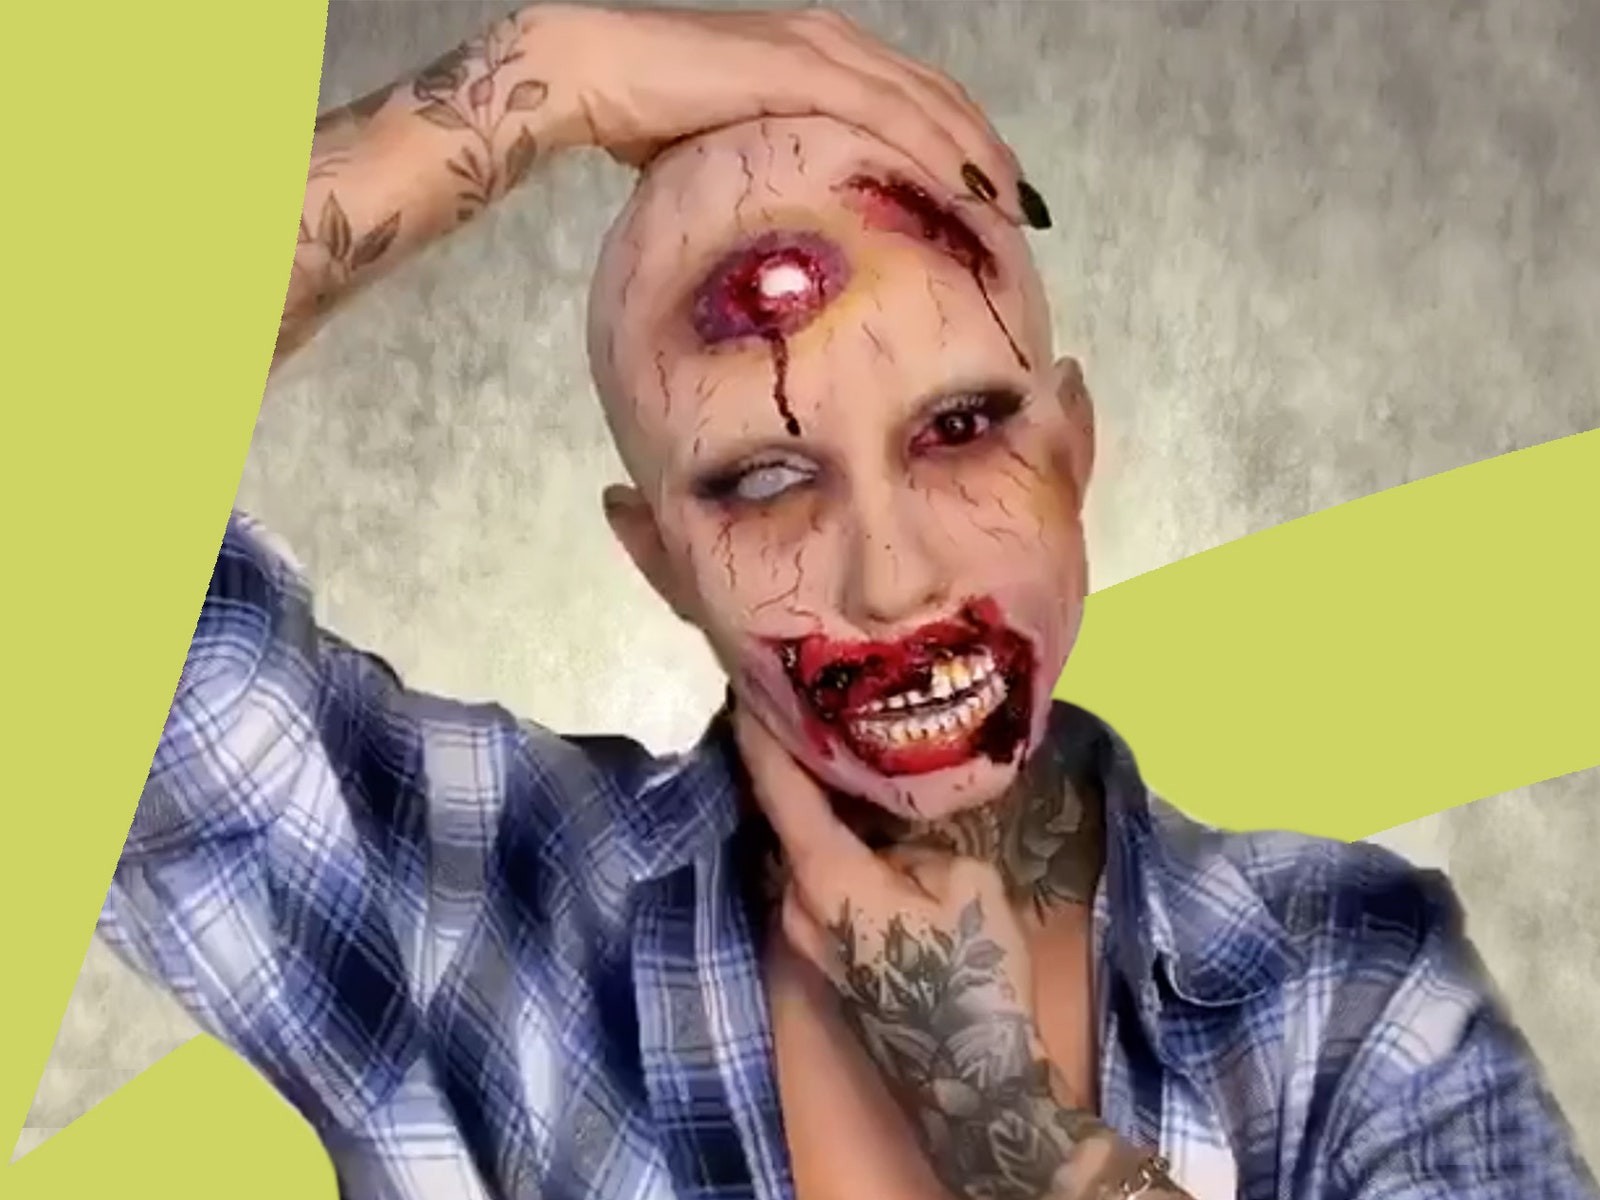 These zombie makeup looks on TikTok just made us extra excited for Halloween